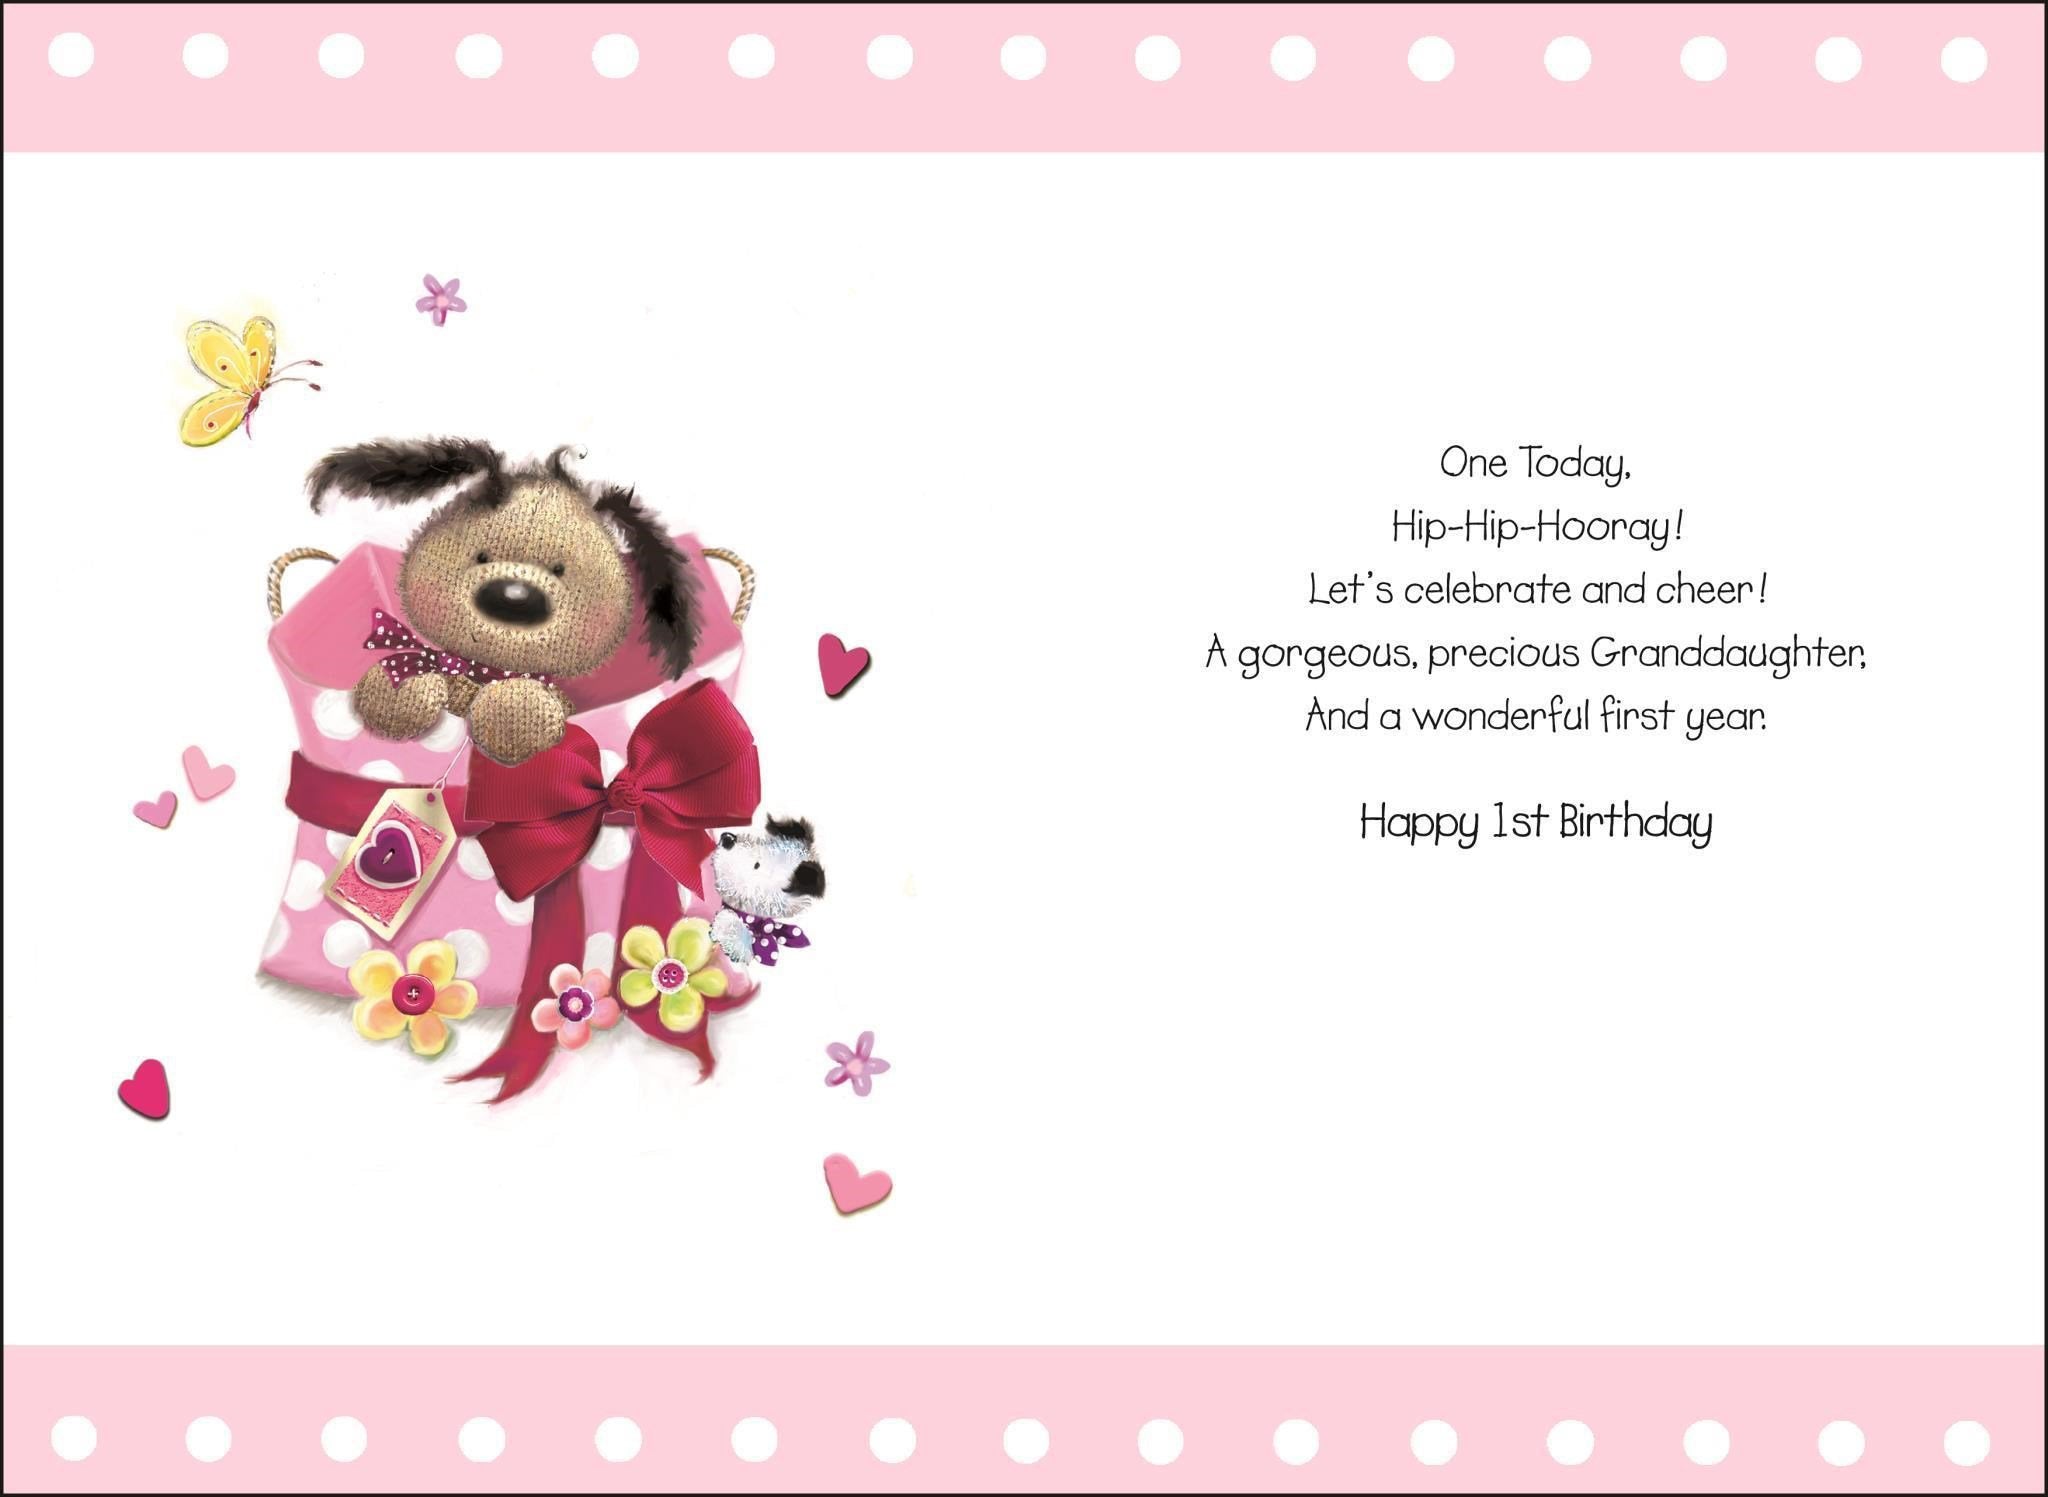 Inside of Granddaughter 1st Birthday Special Greetings Card